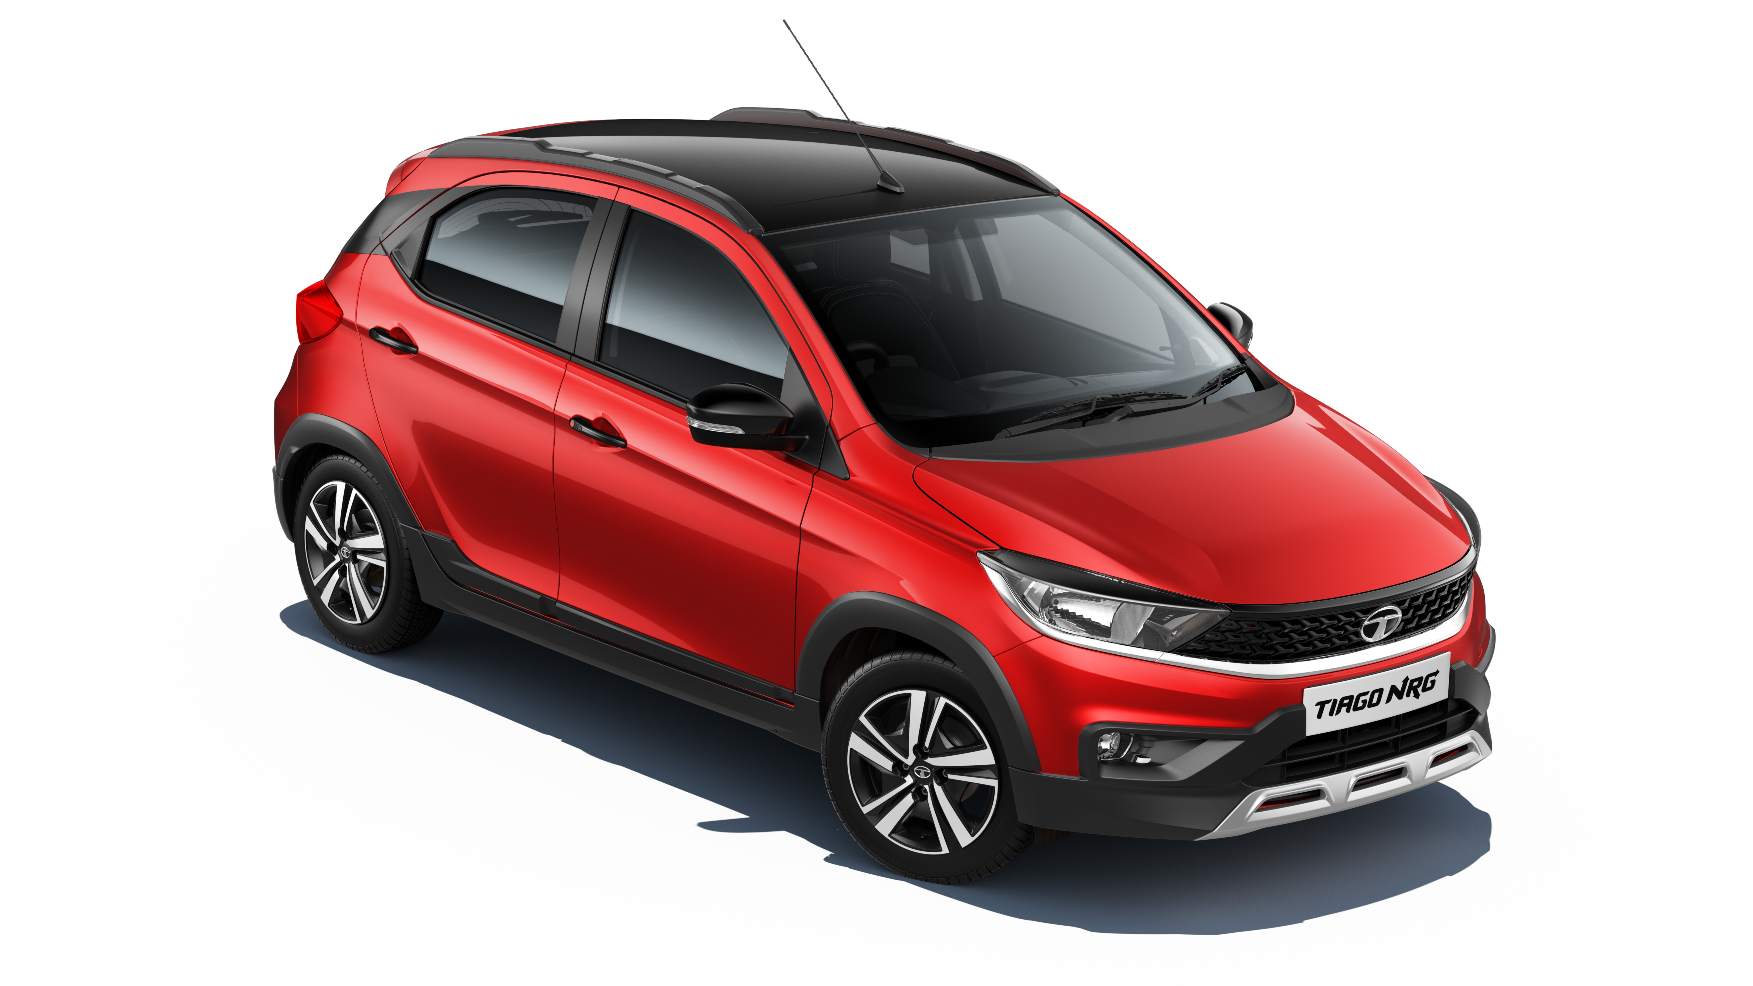 The Tata Tiago NRG facelift is available only with a 1.2-litre petrol engine. Image: Tata Motors